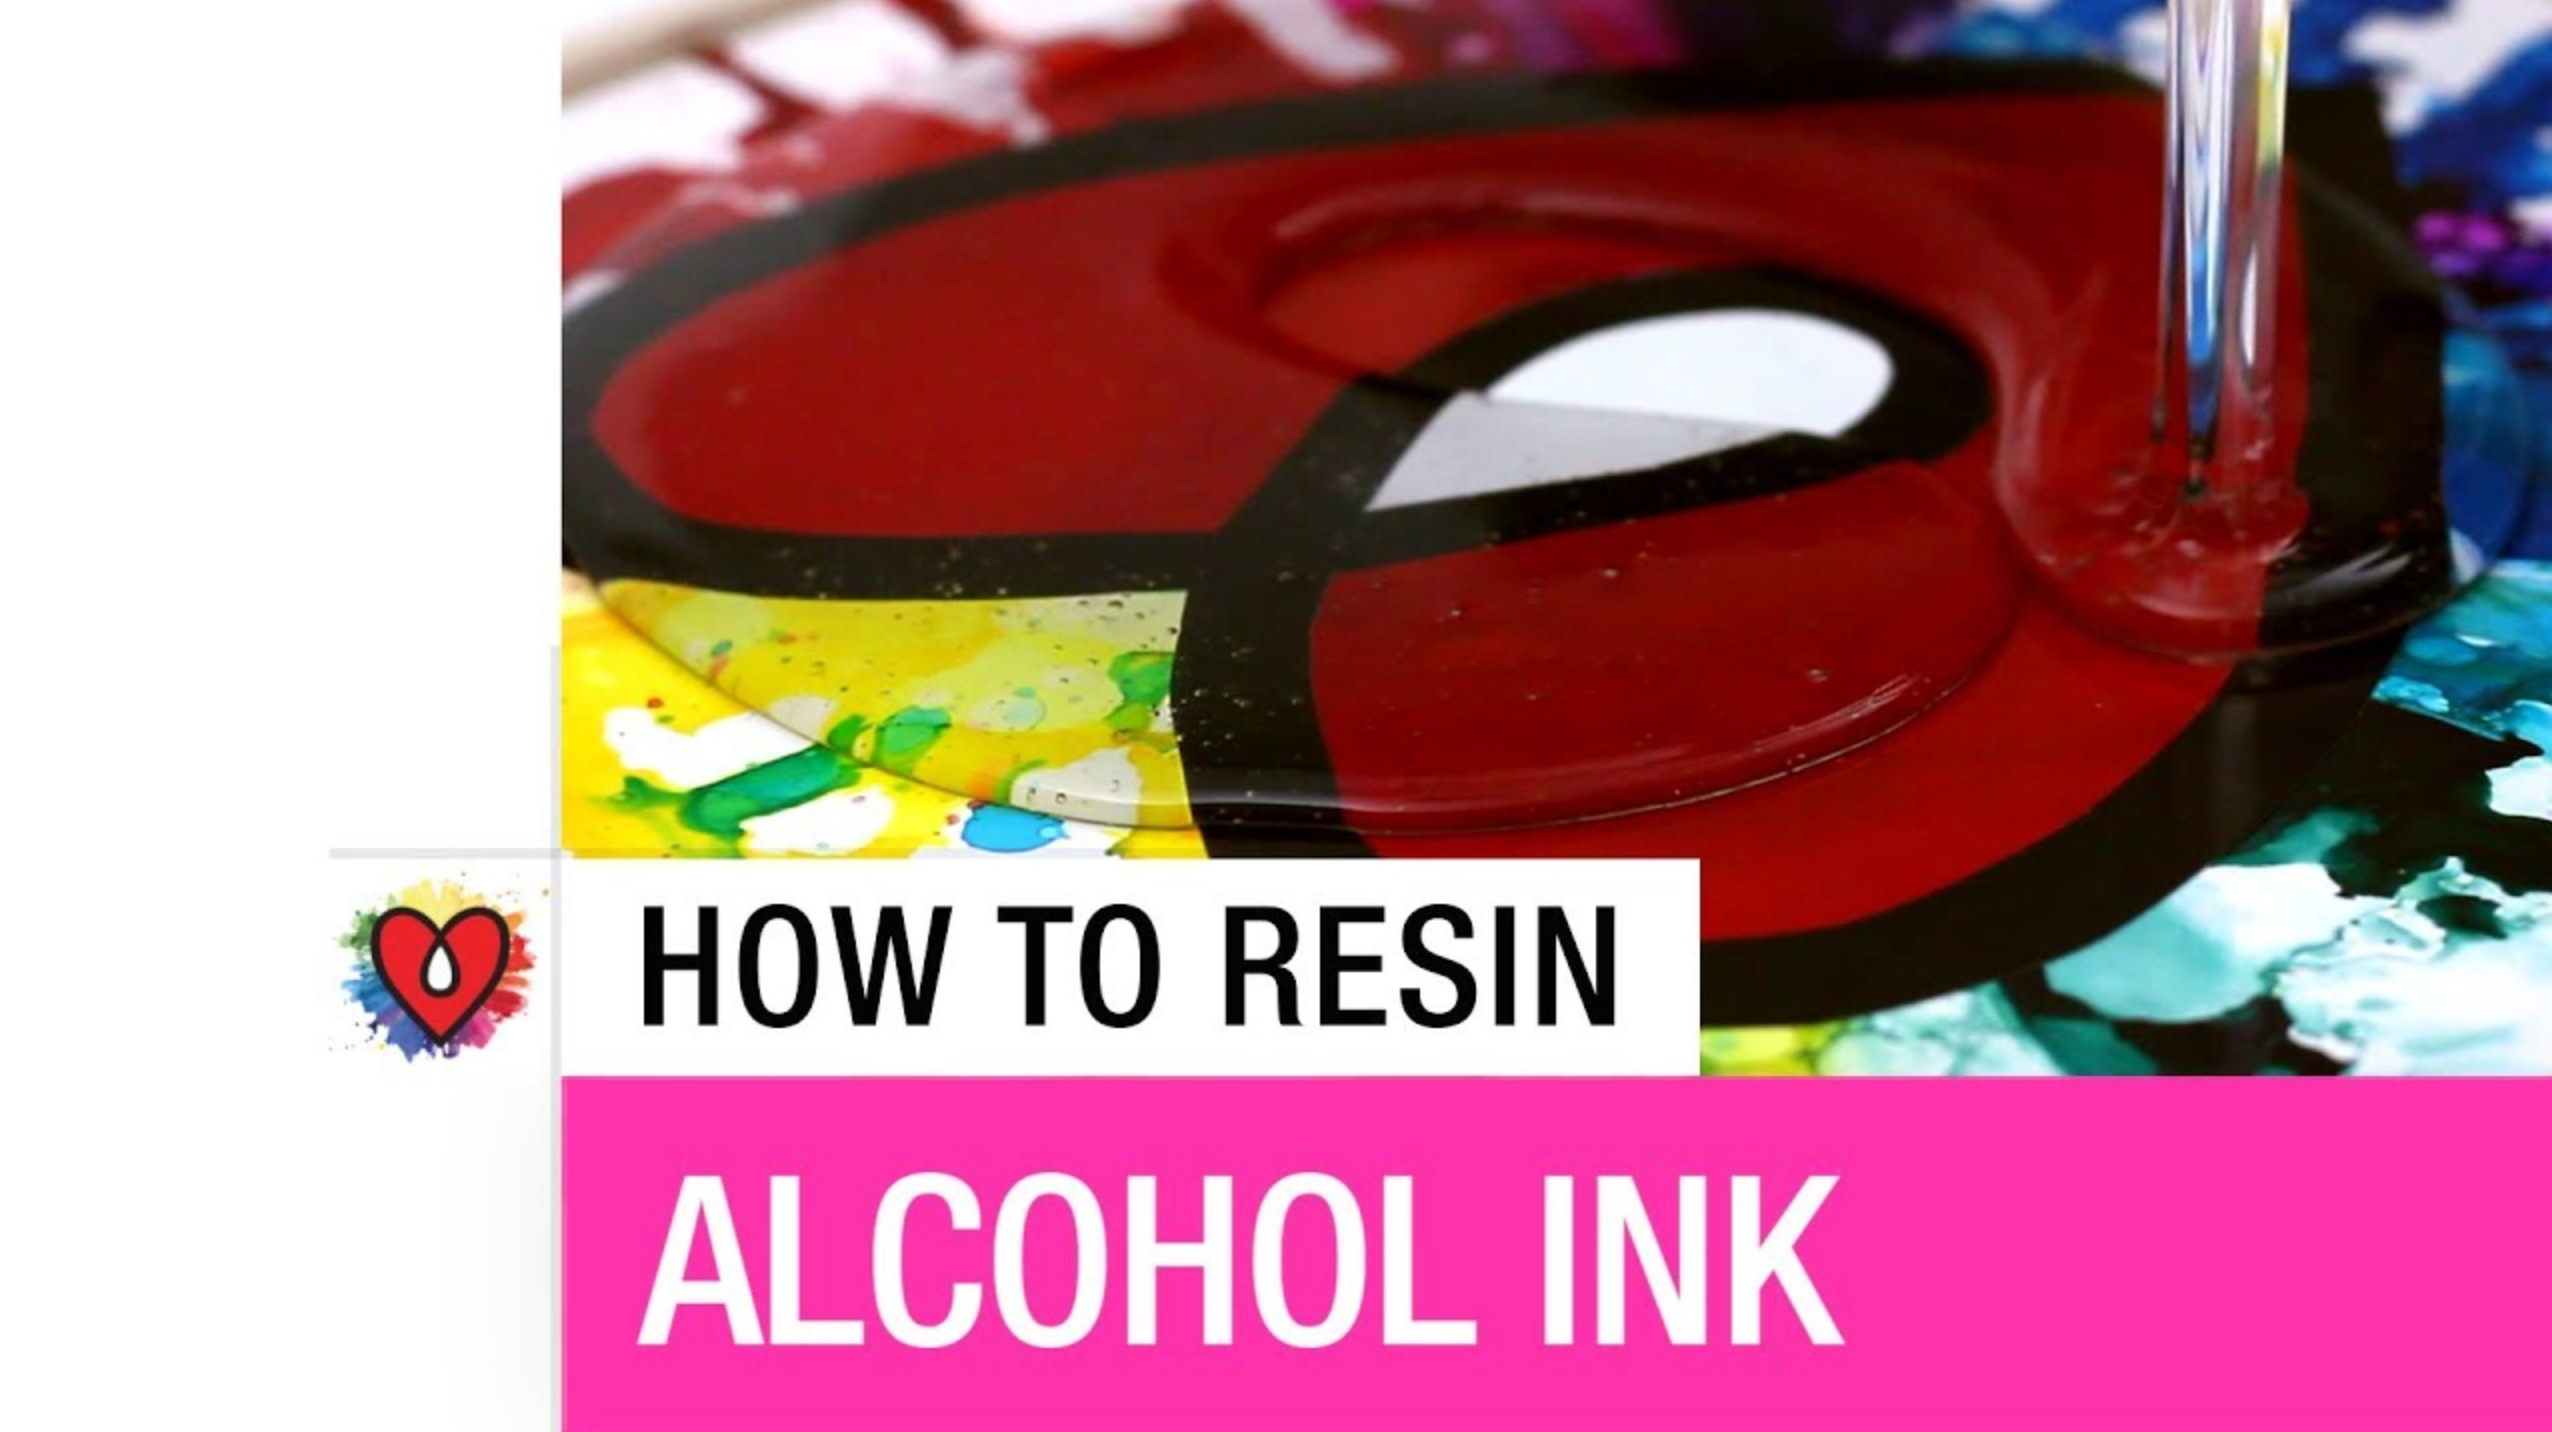 How To Resin Alcohol Ink on Yupo, Resin Video Tutorial